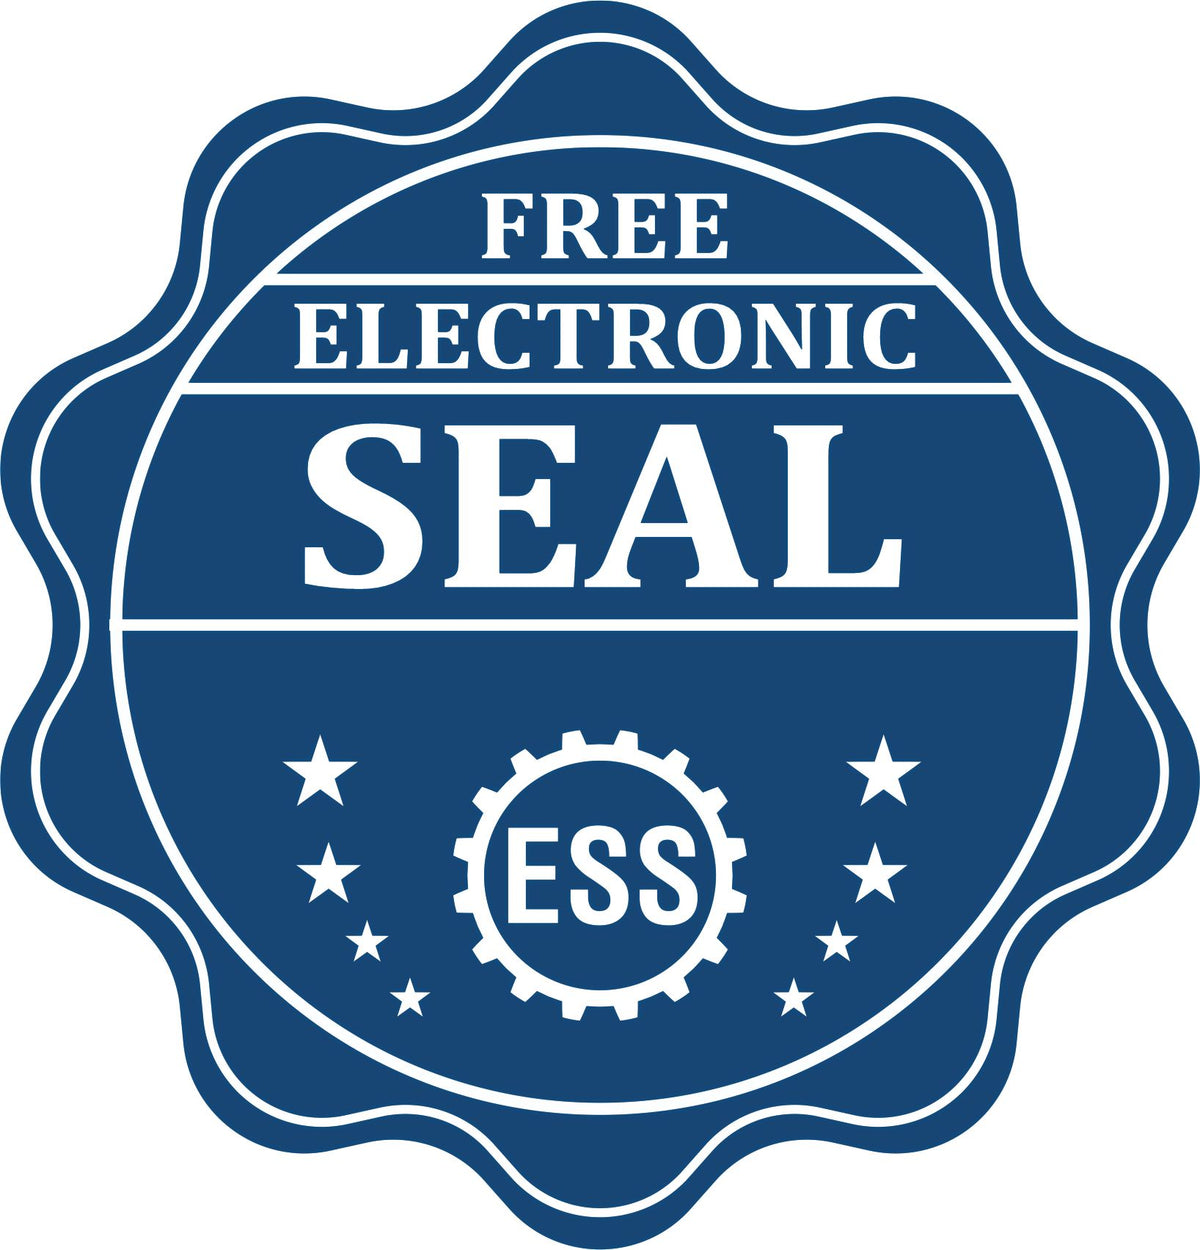 A badge showing a free electronic seal for the District of Columbia Desk Surveyor Seal Embosser with stars and the ESS gear on the emblem.